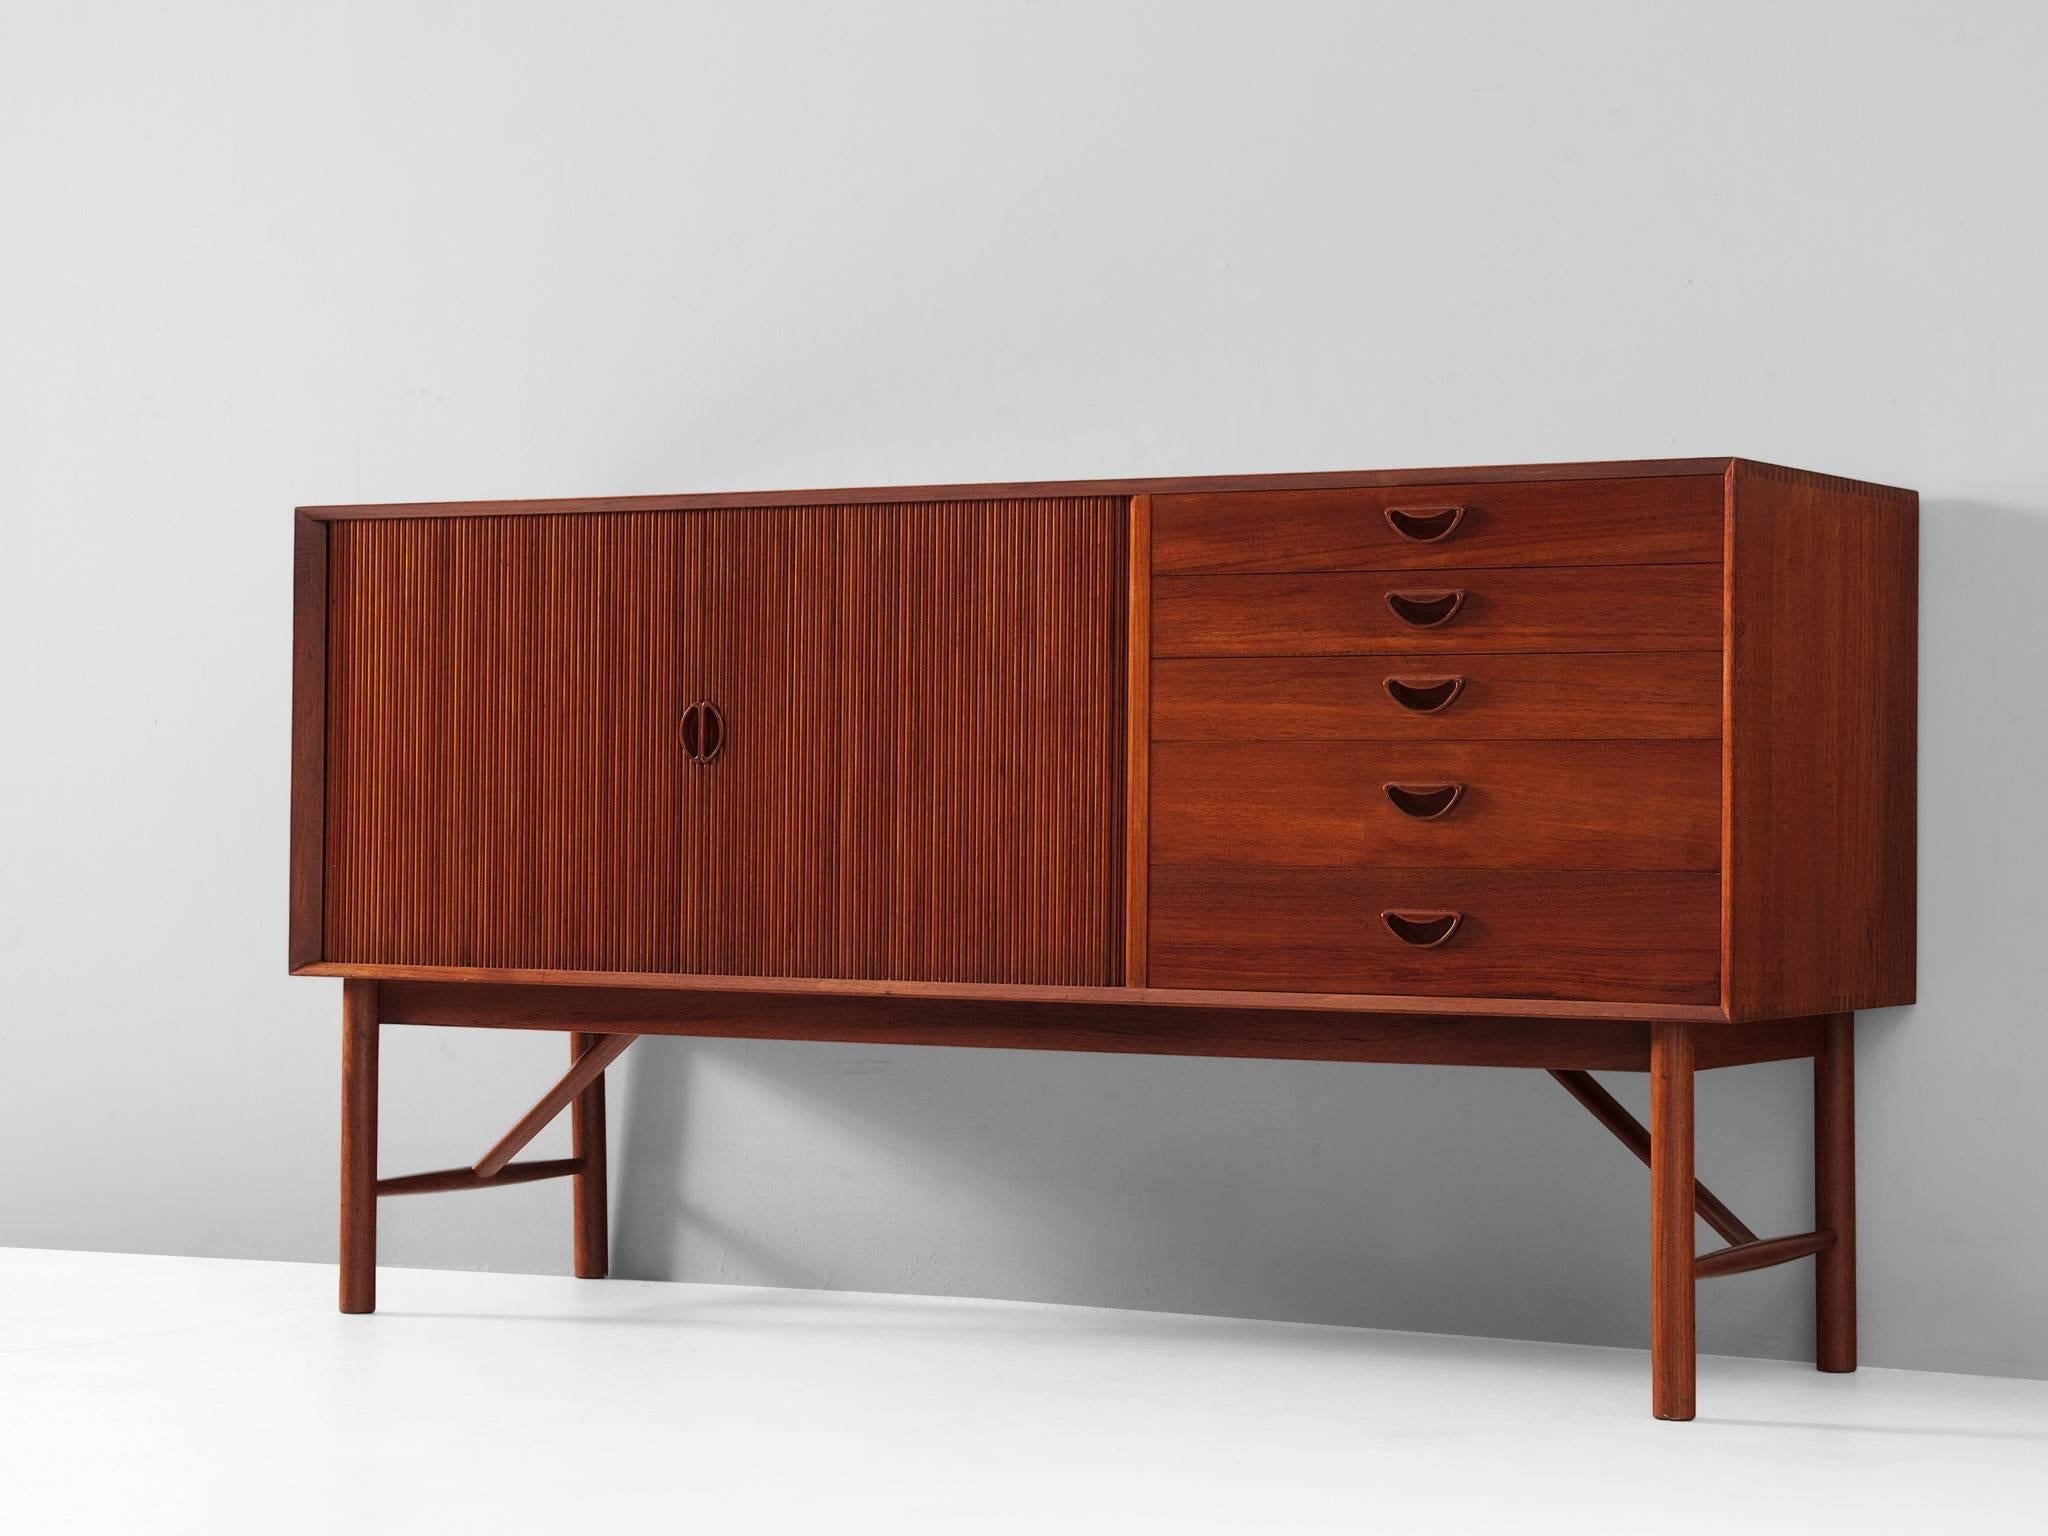 Sideboard, in teak, by Peter Hvidt & Orla Mølgaard Nielsen for Soborg Møbelfabrik, Denmark, 1959.

High quality and fine designed credenza in teak by Danish designer duo Peter Hvidt and Orla Mølgaard Nielsen. This cabinet shows beautiful detailed